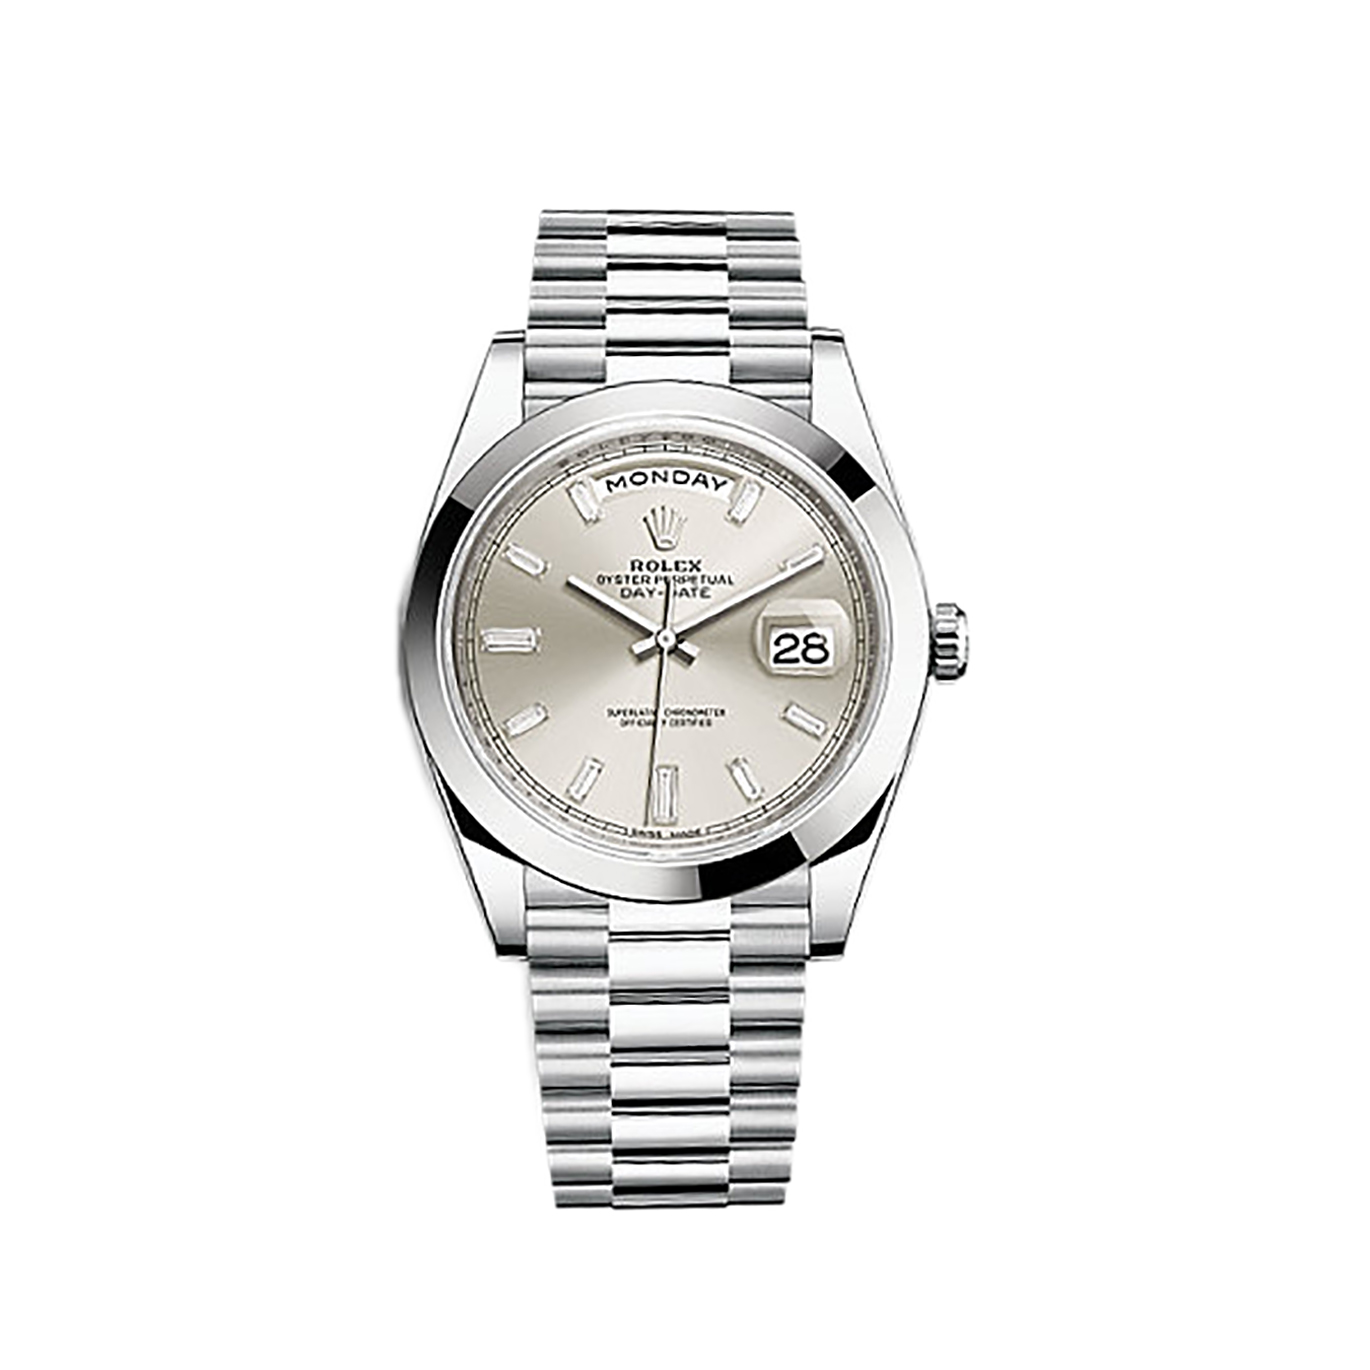 Day-Date 40 228206 Platinum Watch (Silver Set with Diamonds)